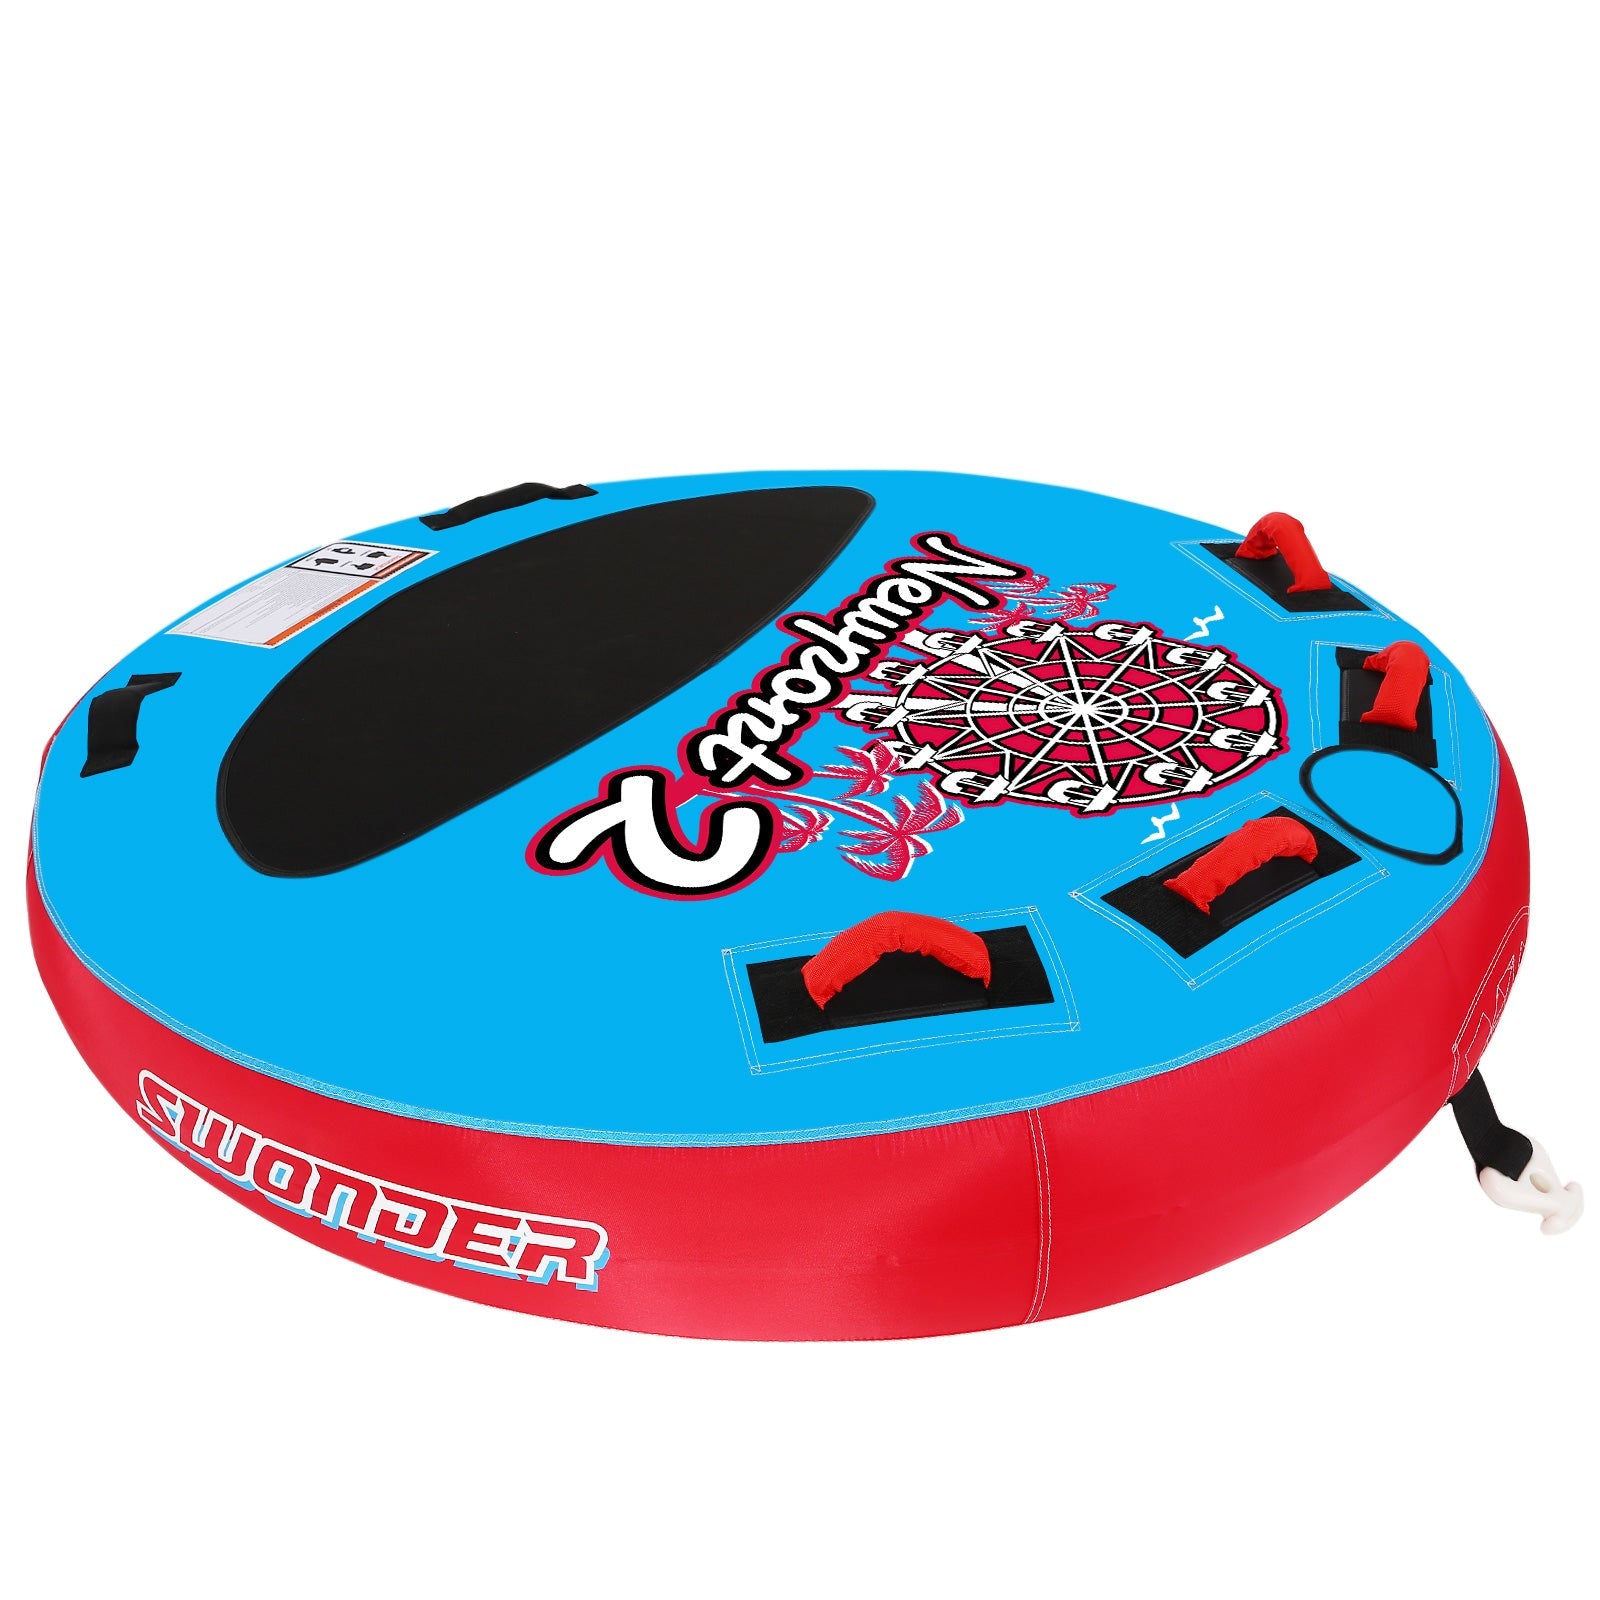 Newport2 Towable Tube for Boating, 1-2 Rider